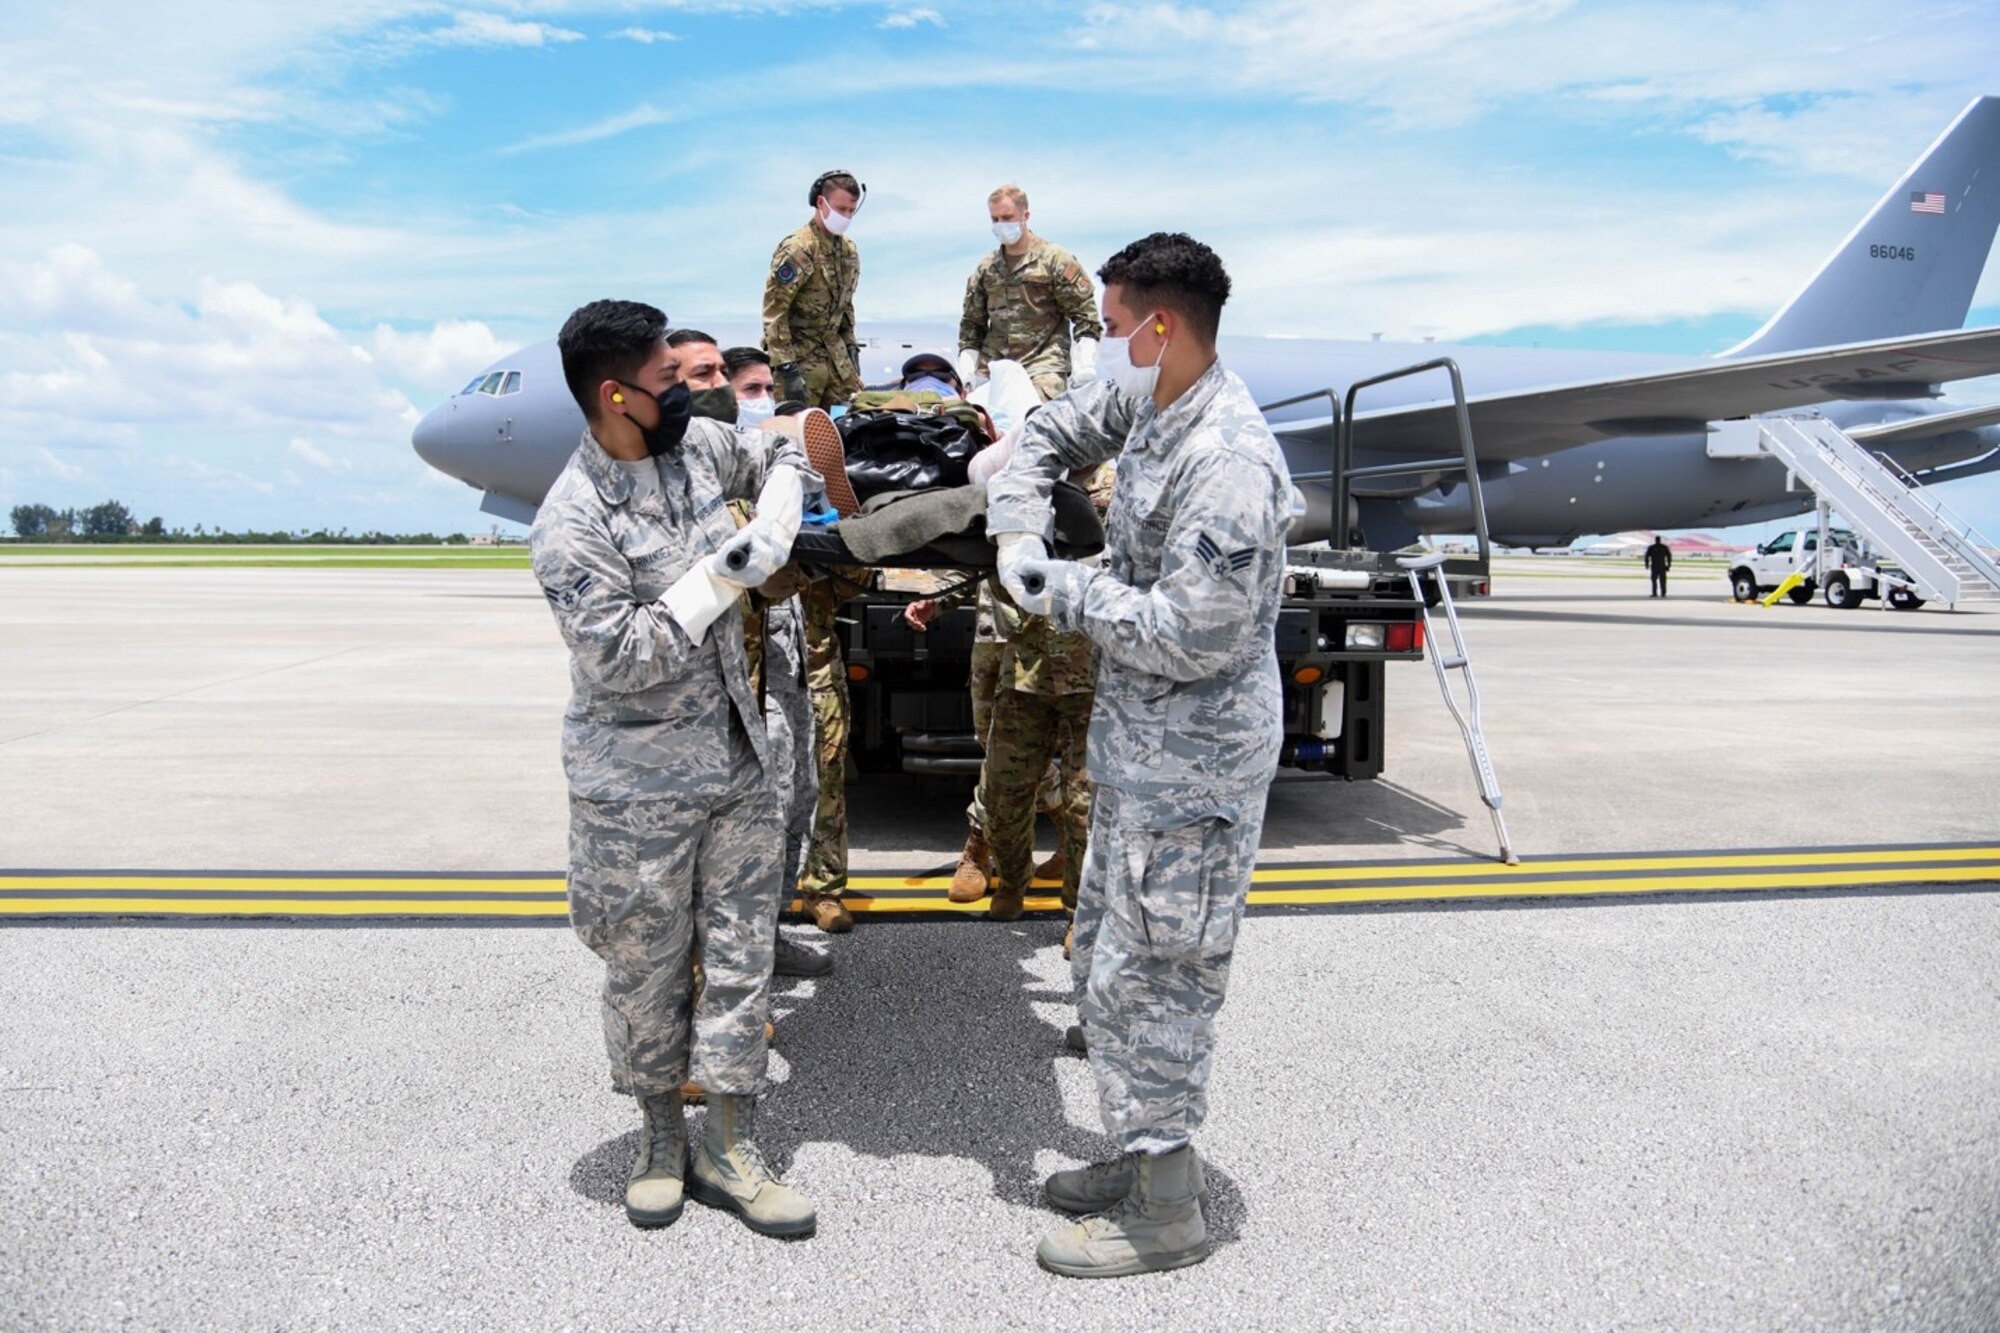 Airmen from the 45th Operational Medical Readiness Squadron offload a patient at Patrick Air Force Base, Florida, July 10, 2020. The patients had recently returned from overseas